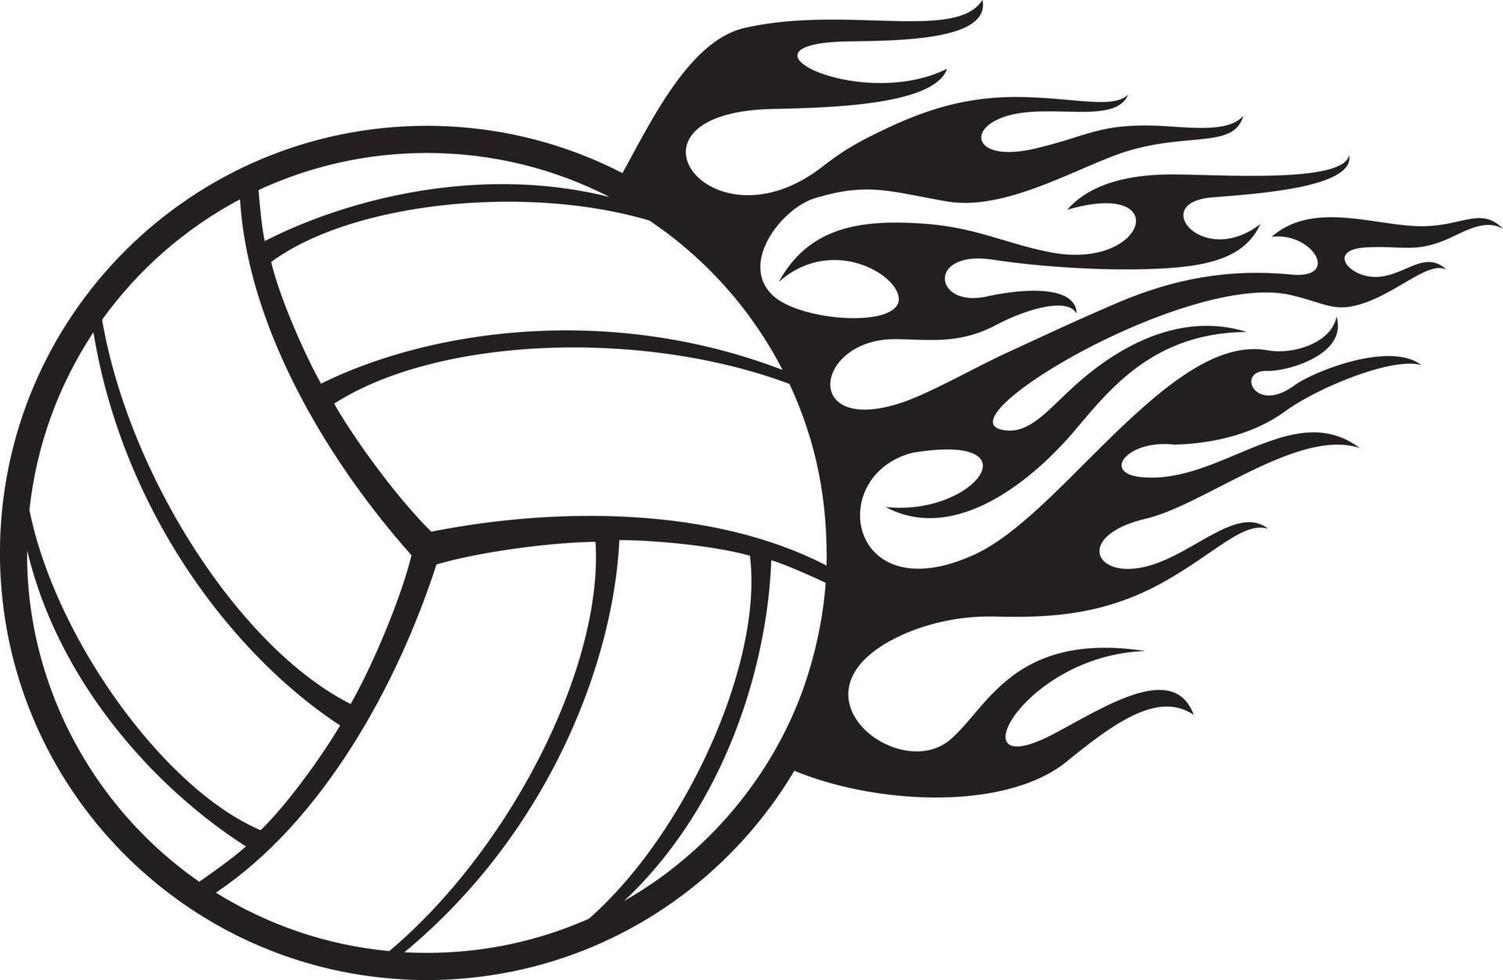 Flaming volleyball ball black and white. Vector illustration. 12867363 ...